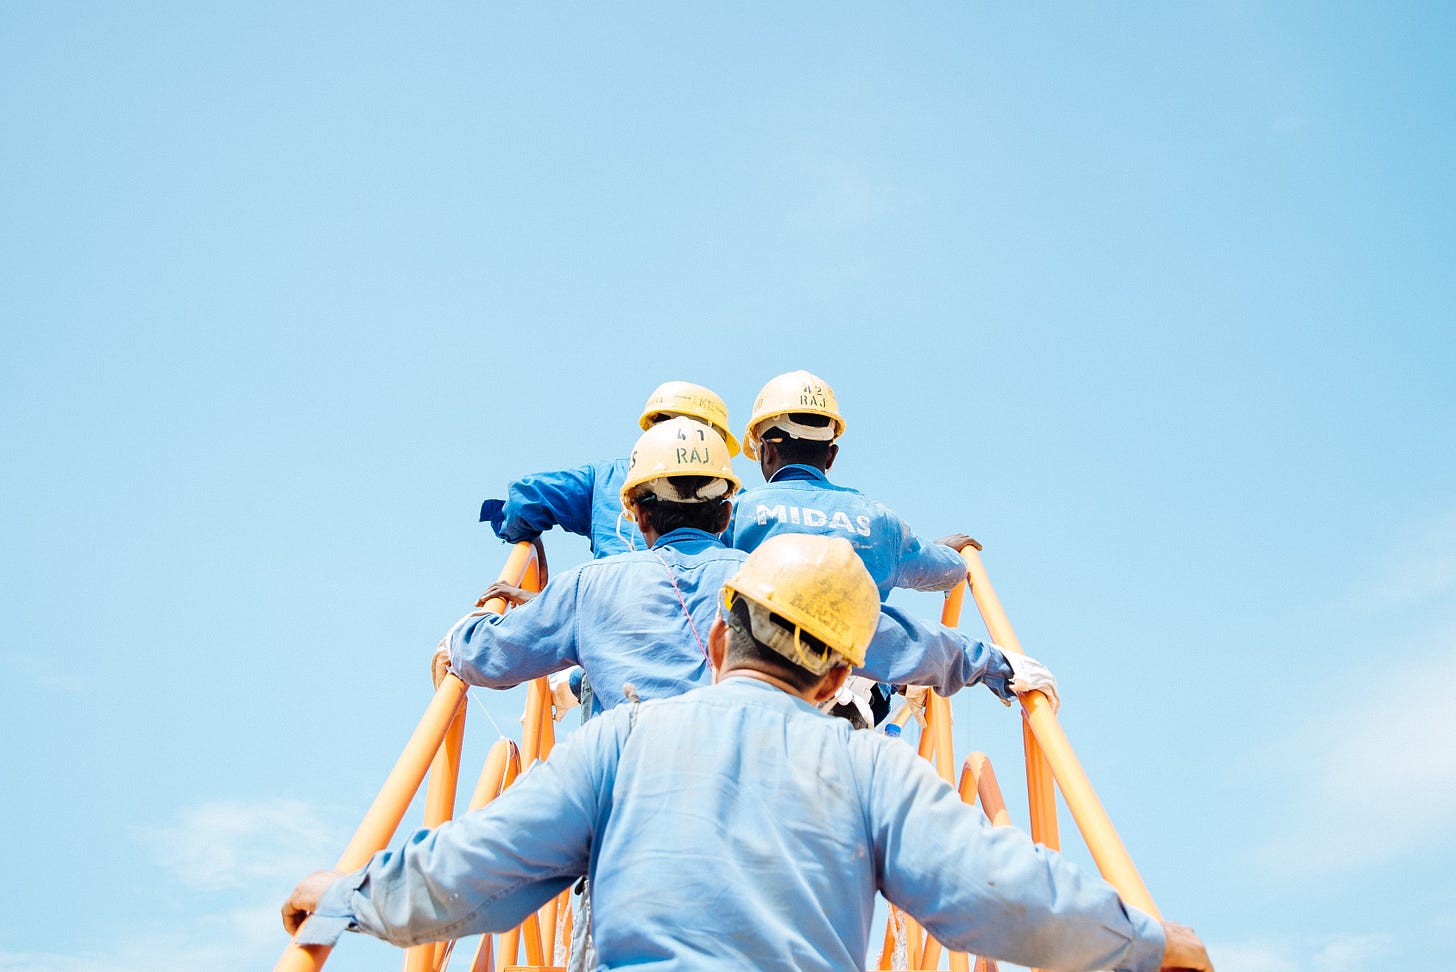 A photo of four workers, seen from behind as they climb a staircase with yellow metal railings towards a blue sky. The worker are wearing blue shirts and yellow hard hats.